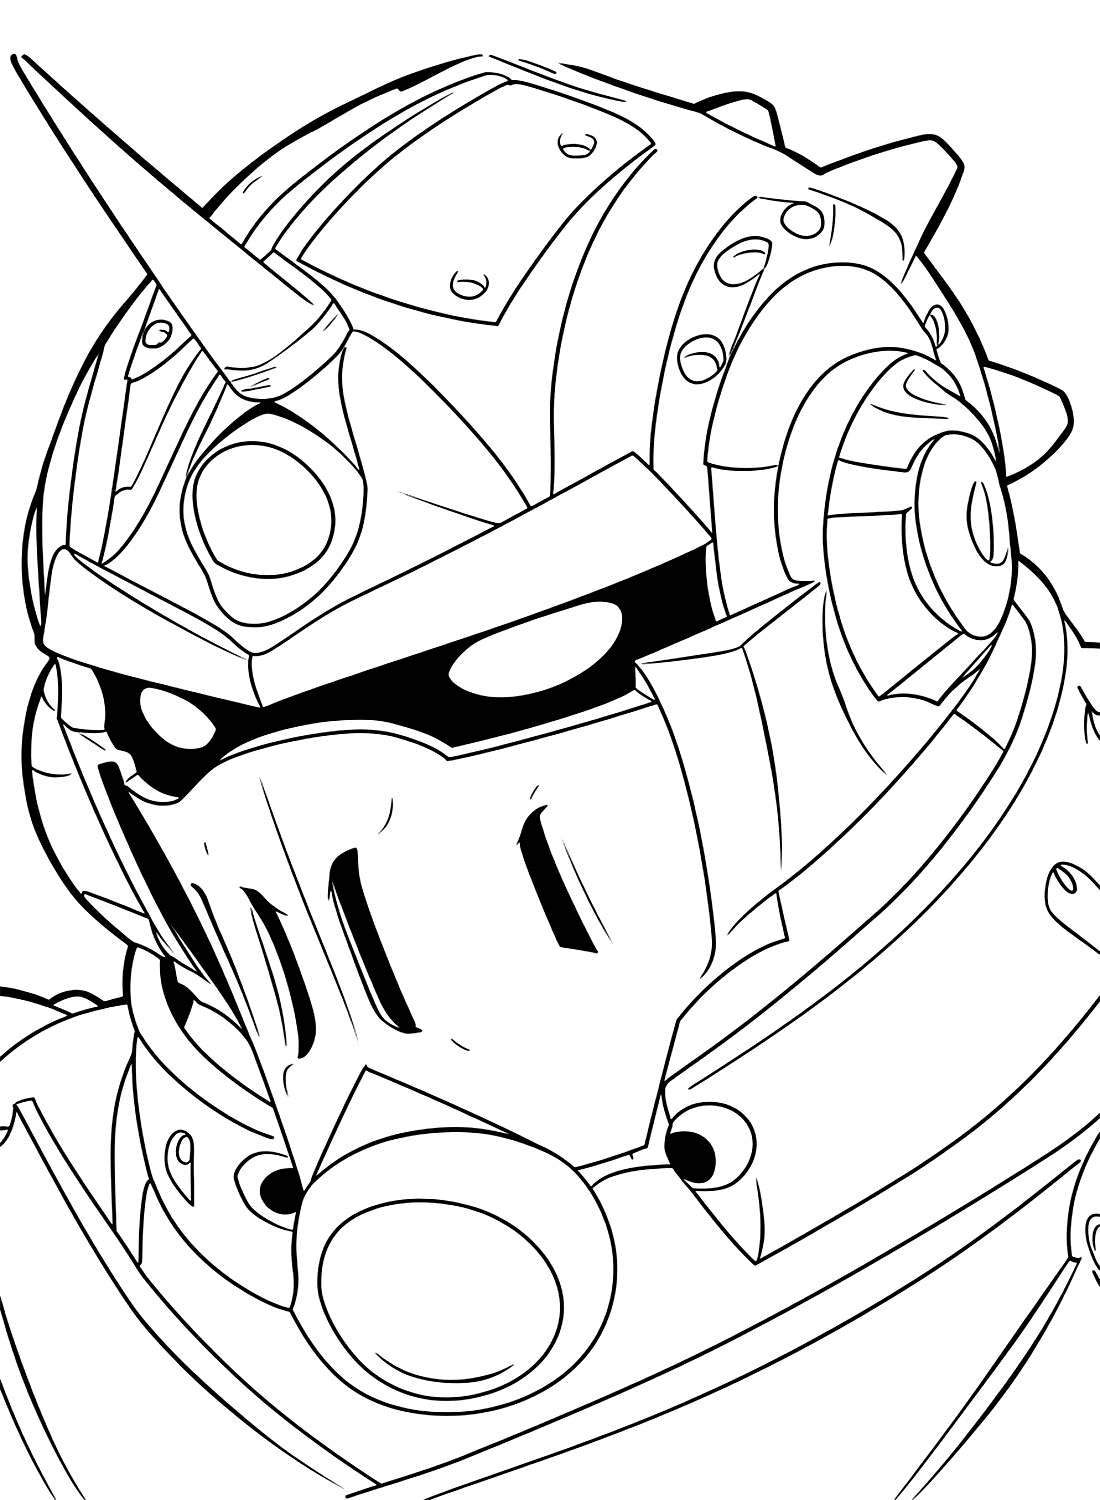 Printable Alphonse Elric Coloring Page from Alphonse Elric